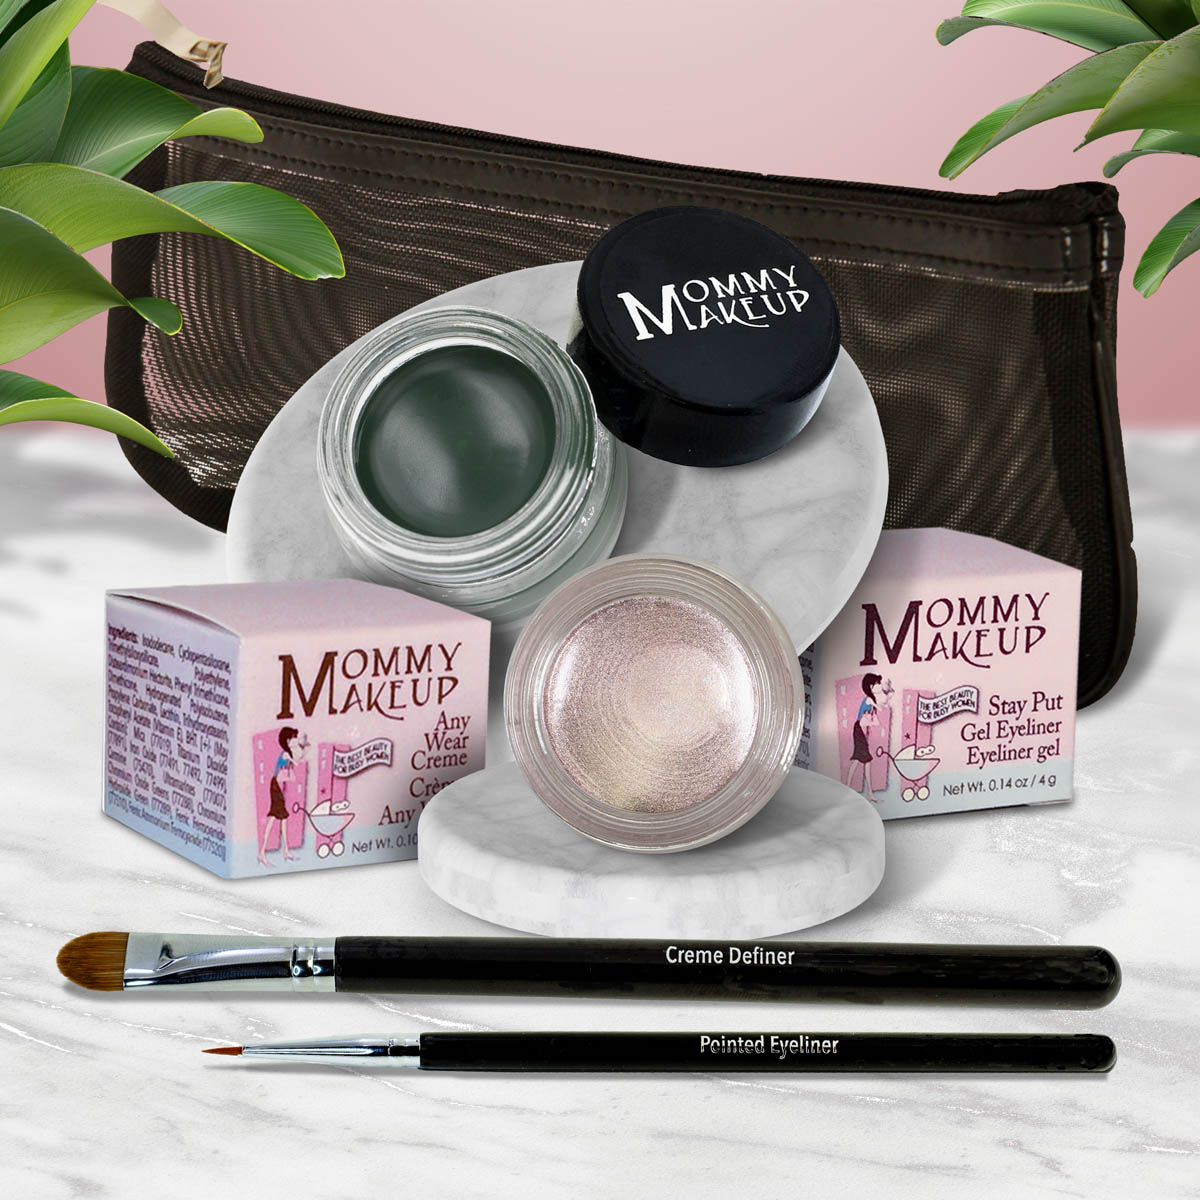 5 piece waterproof eye makeup set. Eyeliner, Eye shadow, brushes. Allergy tested, cruelty free. Made in USA. Crystal - A Pale Shimmering Pewter and Hunter - A Rich Hunter/Forest Green